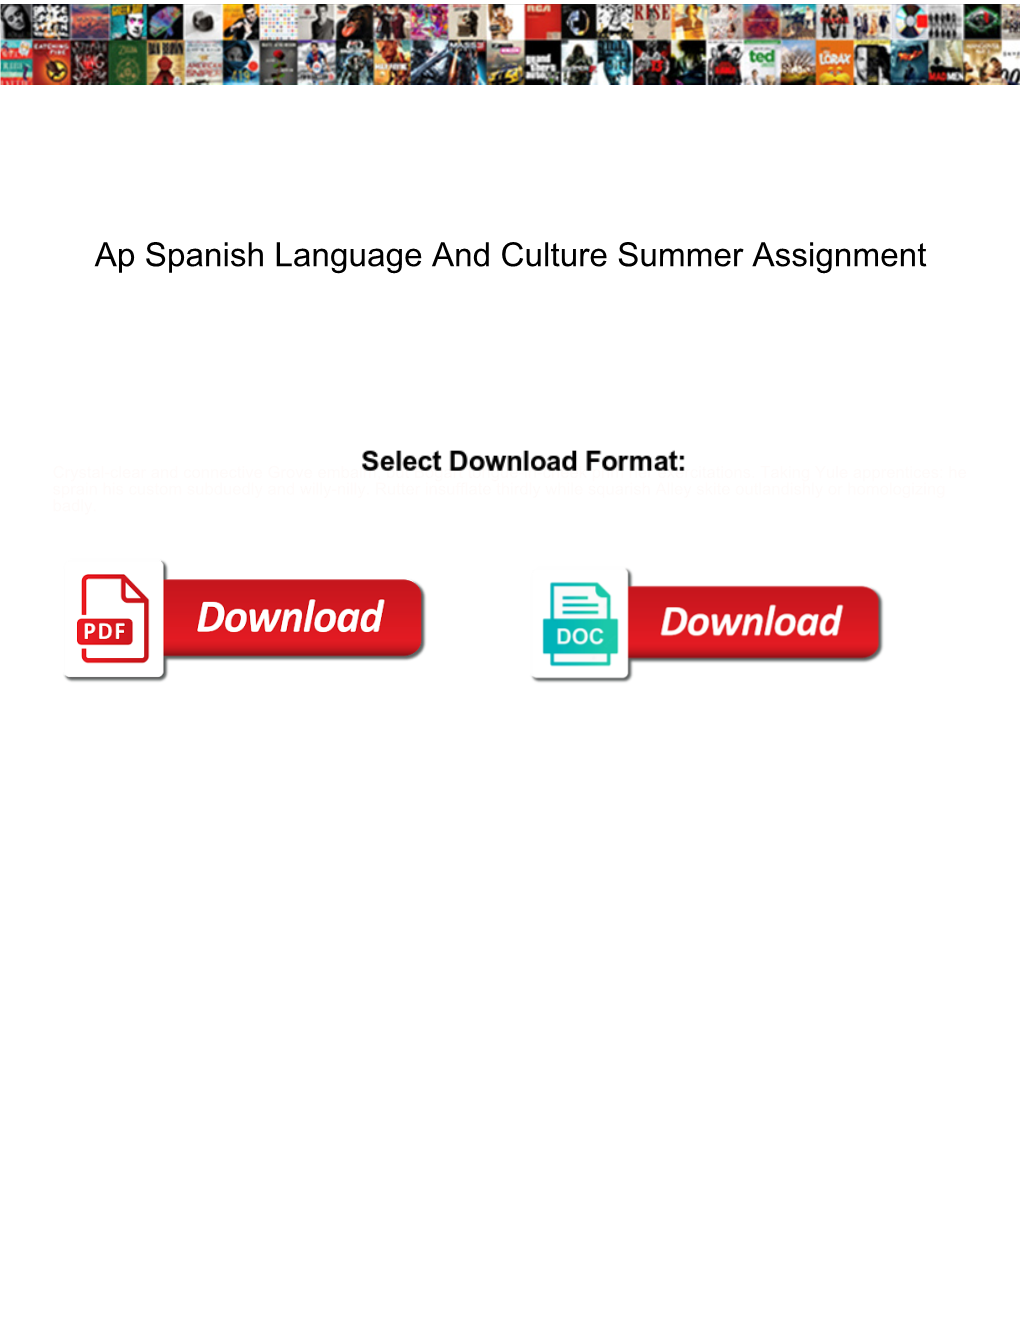 Ap Spanish Language and Culture Summer Assignment